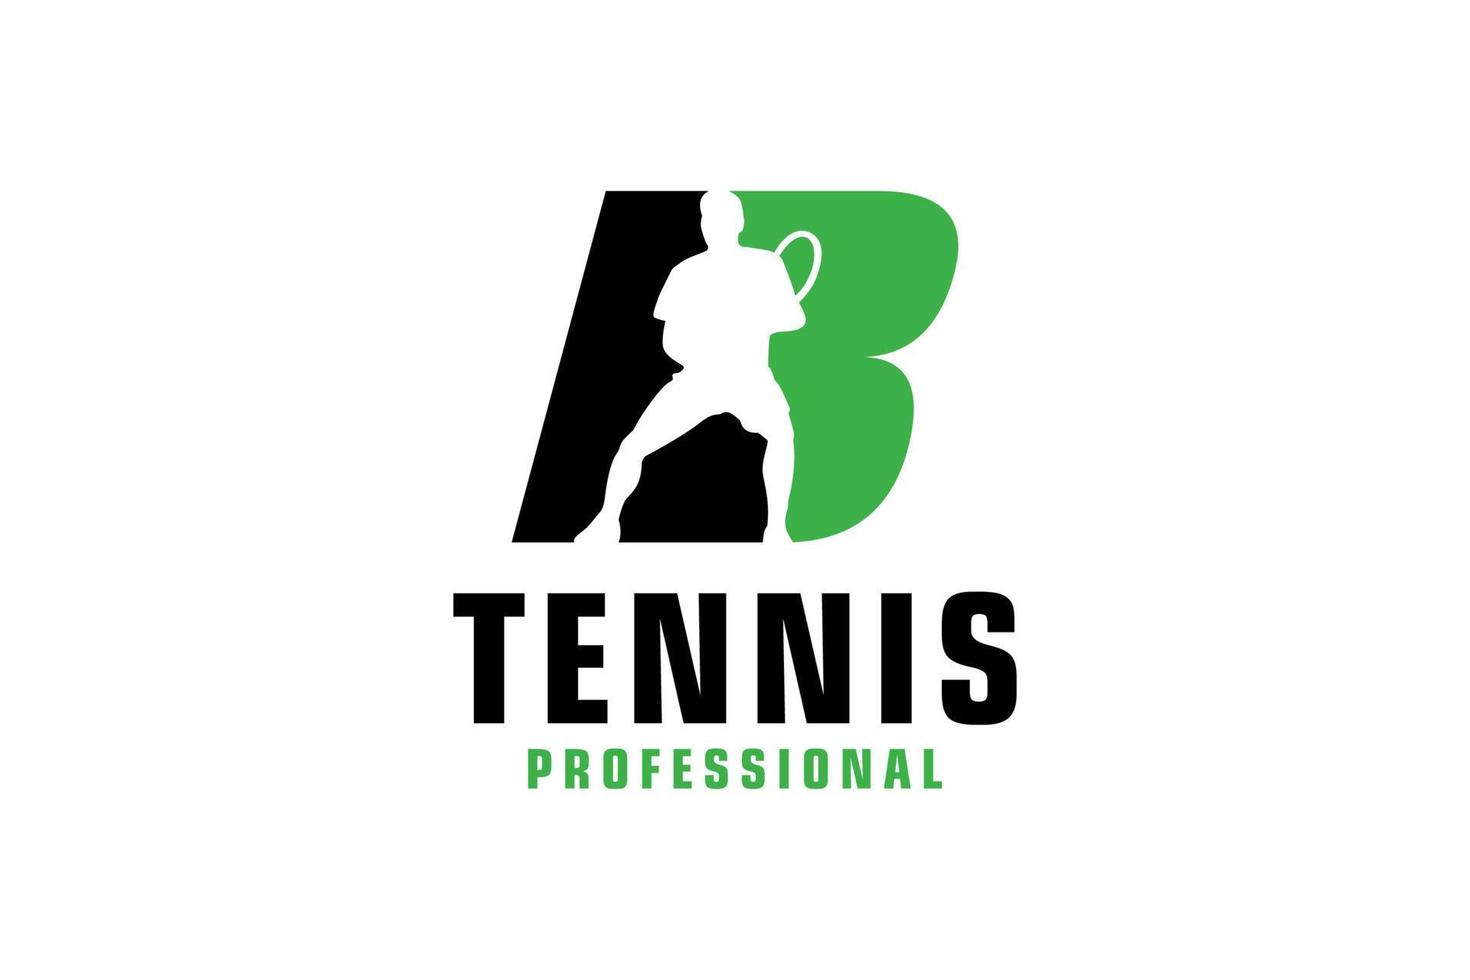 Letter B with Tennis player silhouette Logo Design. Vector Design Template Elements for Sport Team or Corporate Identity.